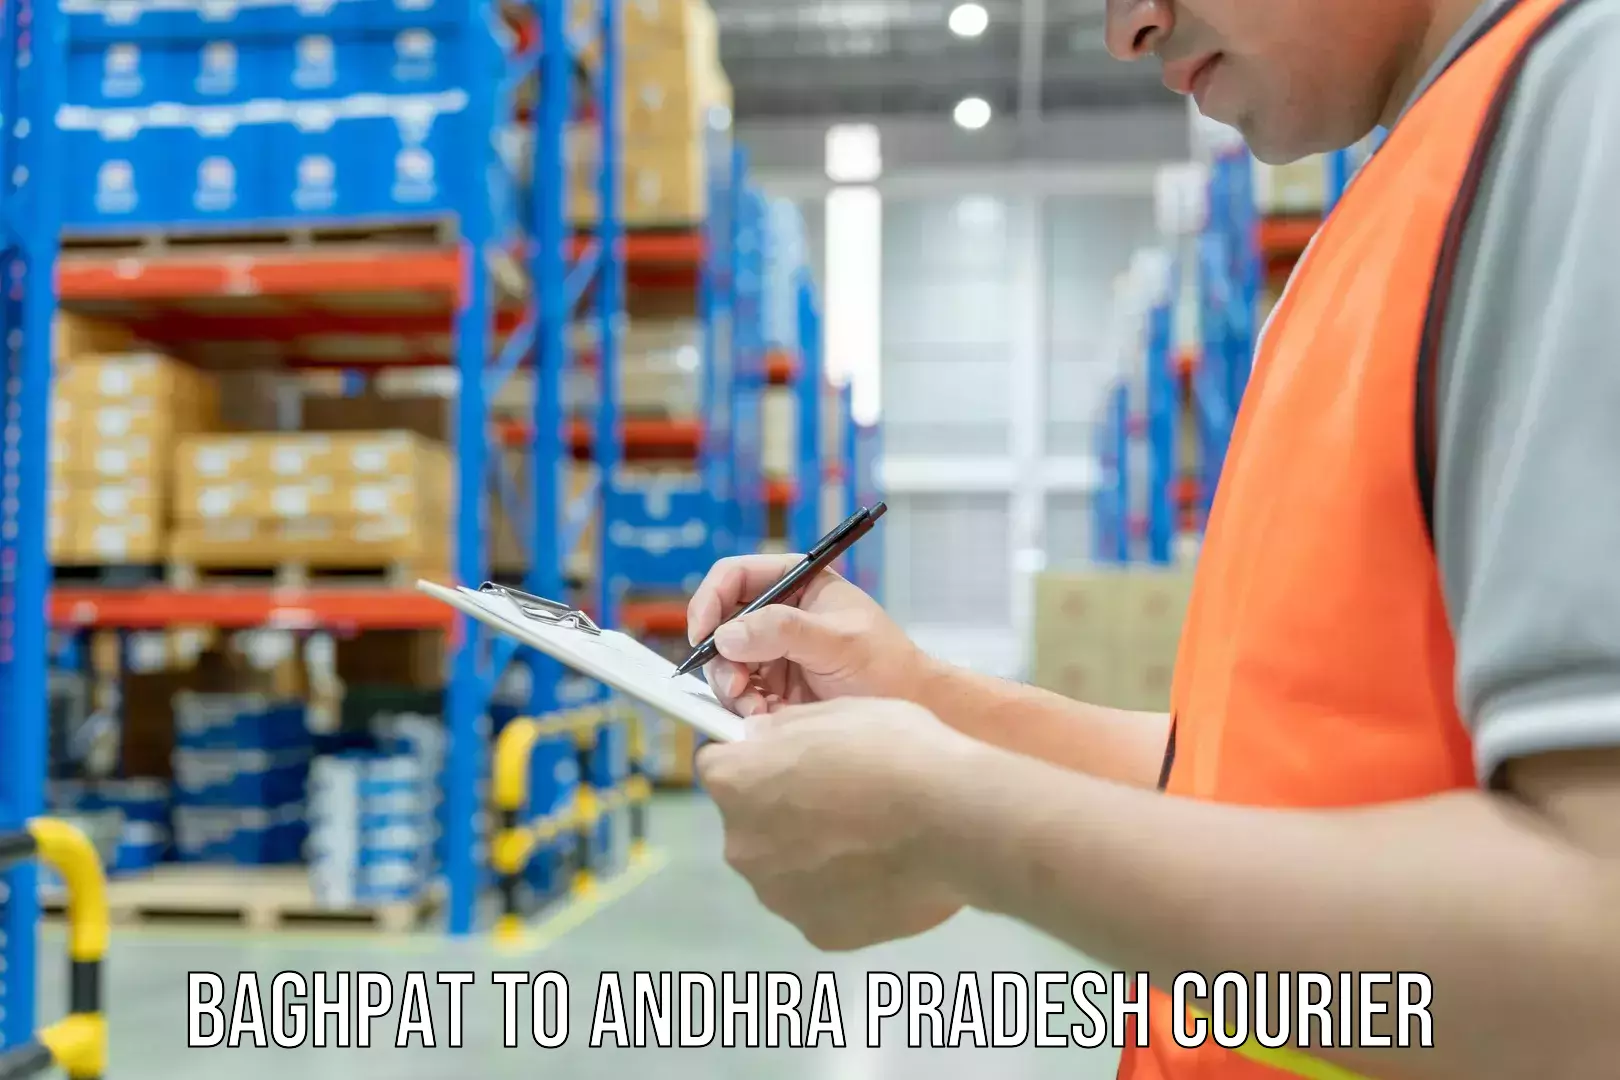 Reliable shipping partners Baghpat to Andhra Pradesh